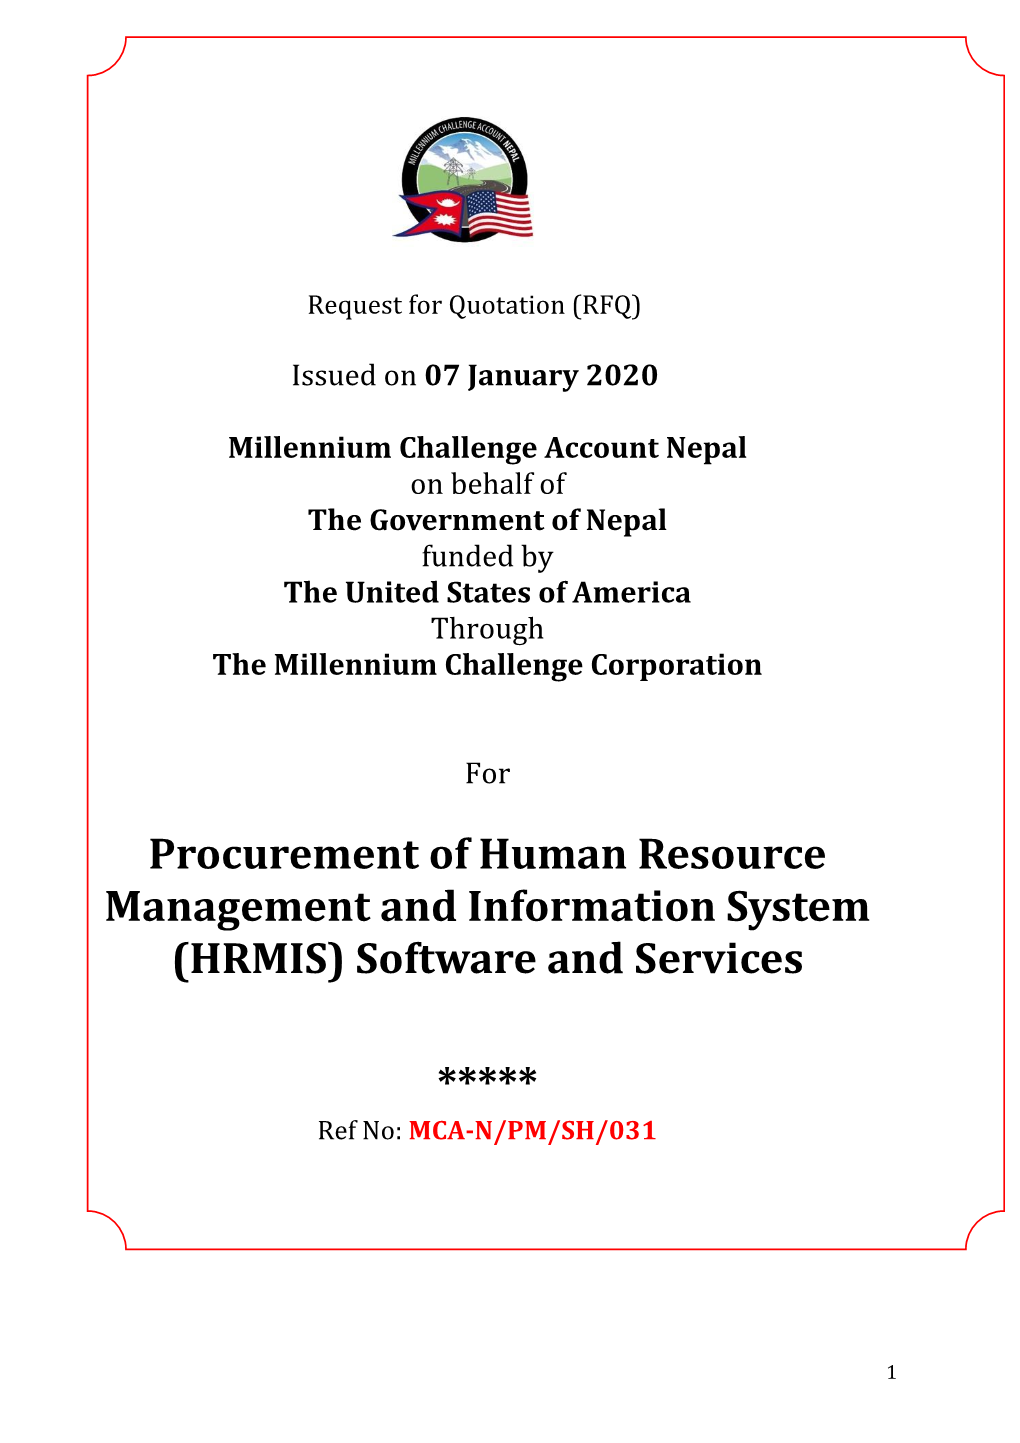 Procurement of Human Resource Management and Information System (HRMIS) Software and Services